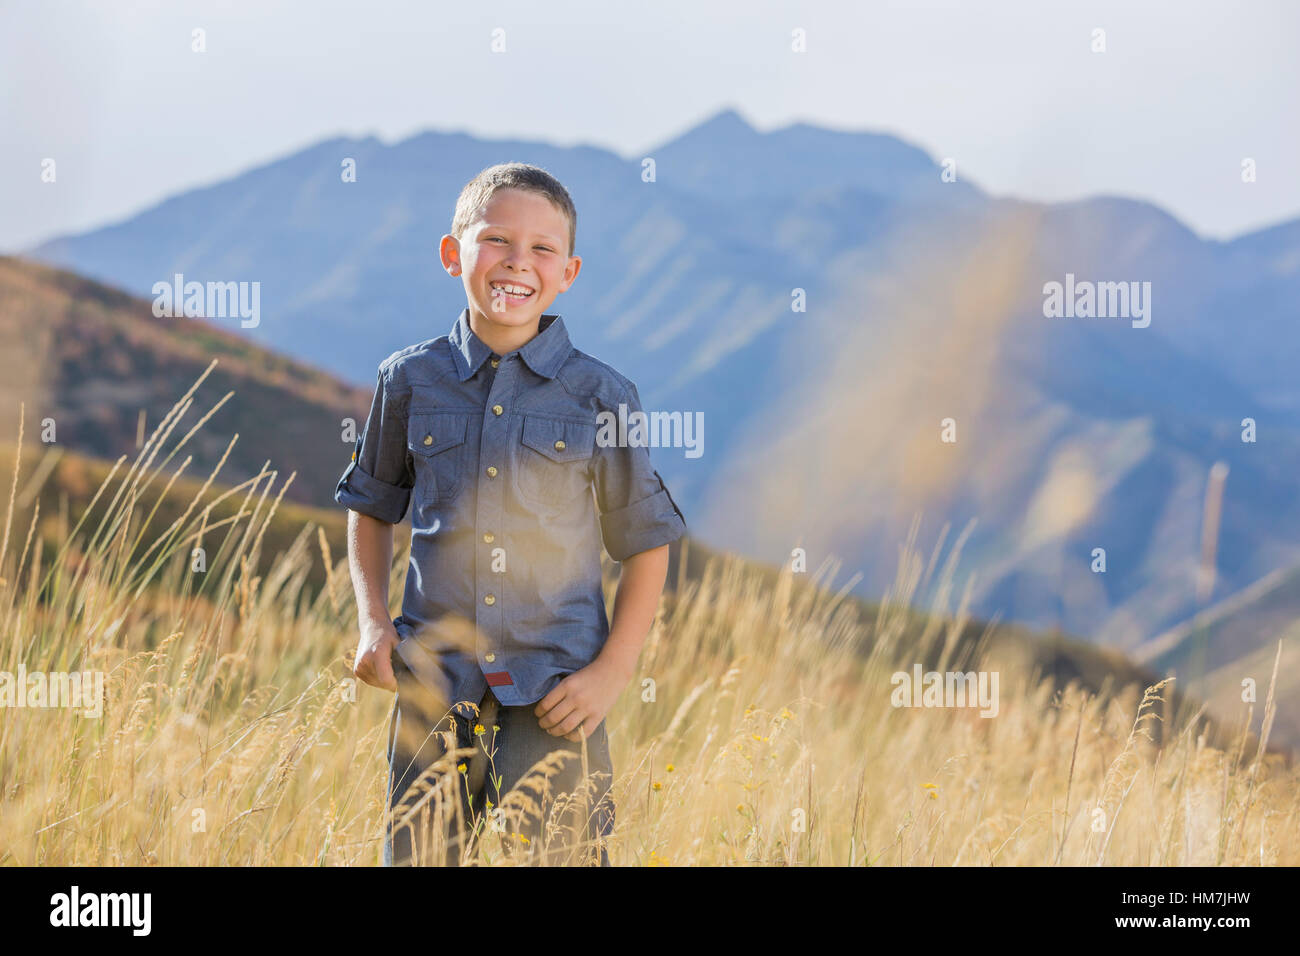 USA, Utah, Provo, Boy (6-7) standing in field Banque D'Images